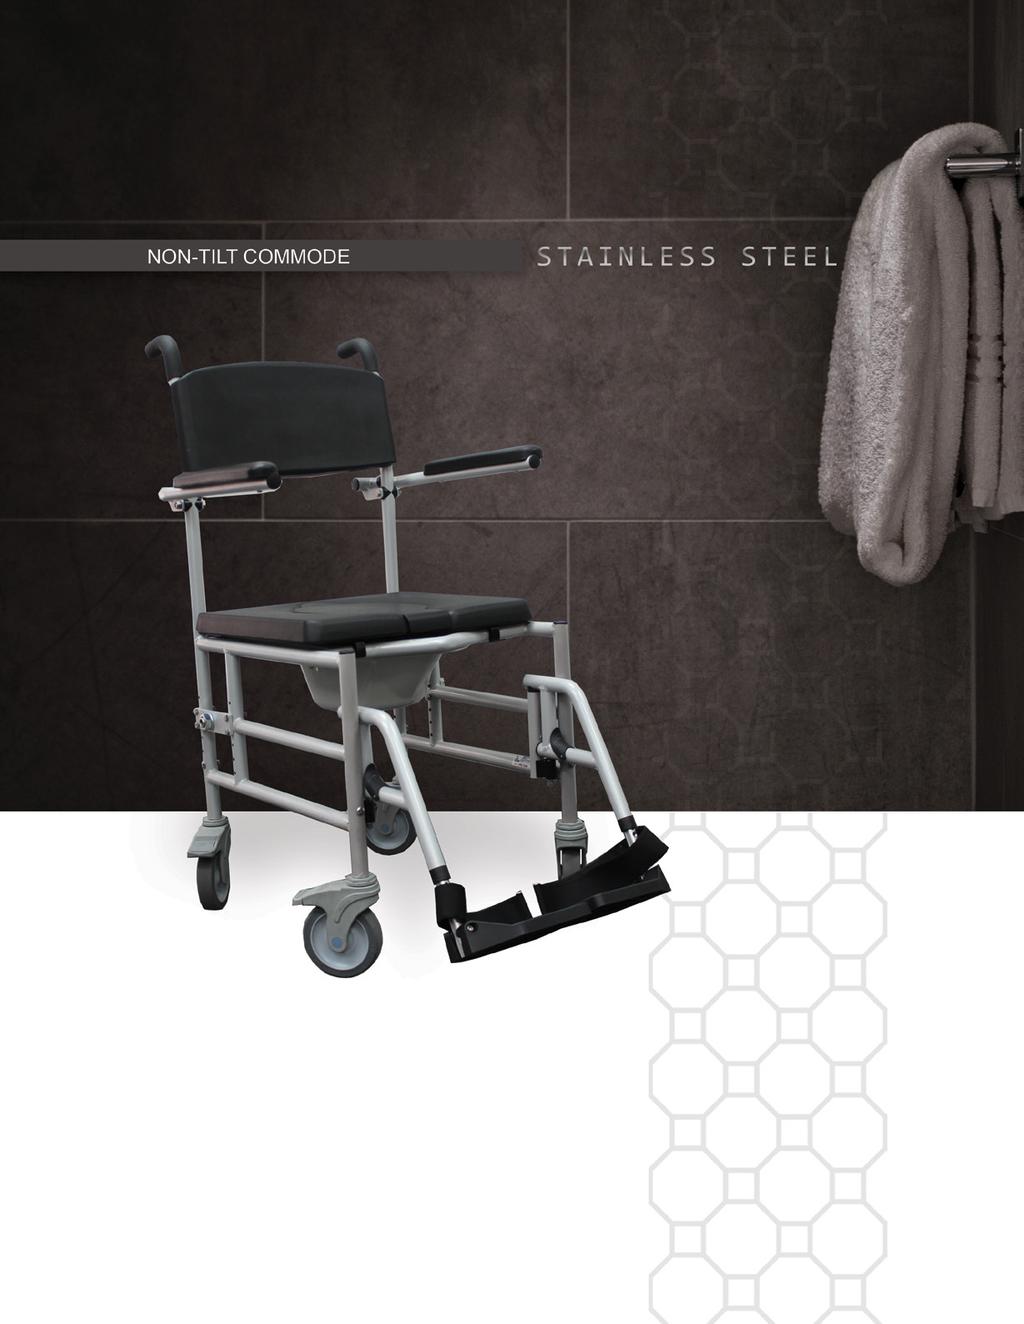 Horizon Power Plus Mobility s HORIZON Commode is promised to excel in quality and functionality.